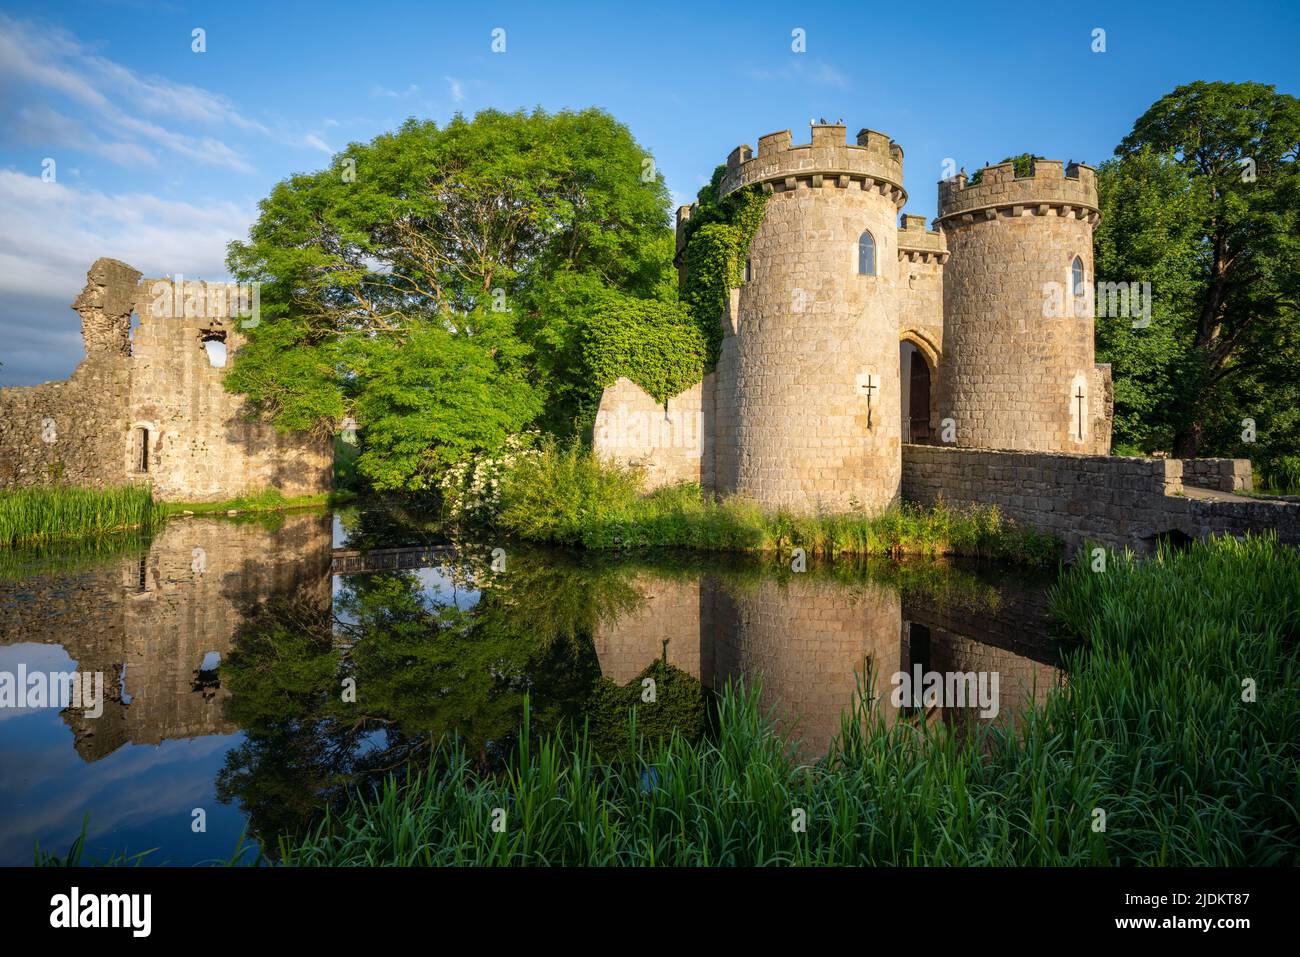 Early morning picture of Whittington Castle in Shropshire, England Stock Photo